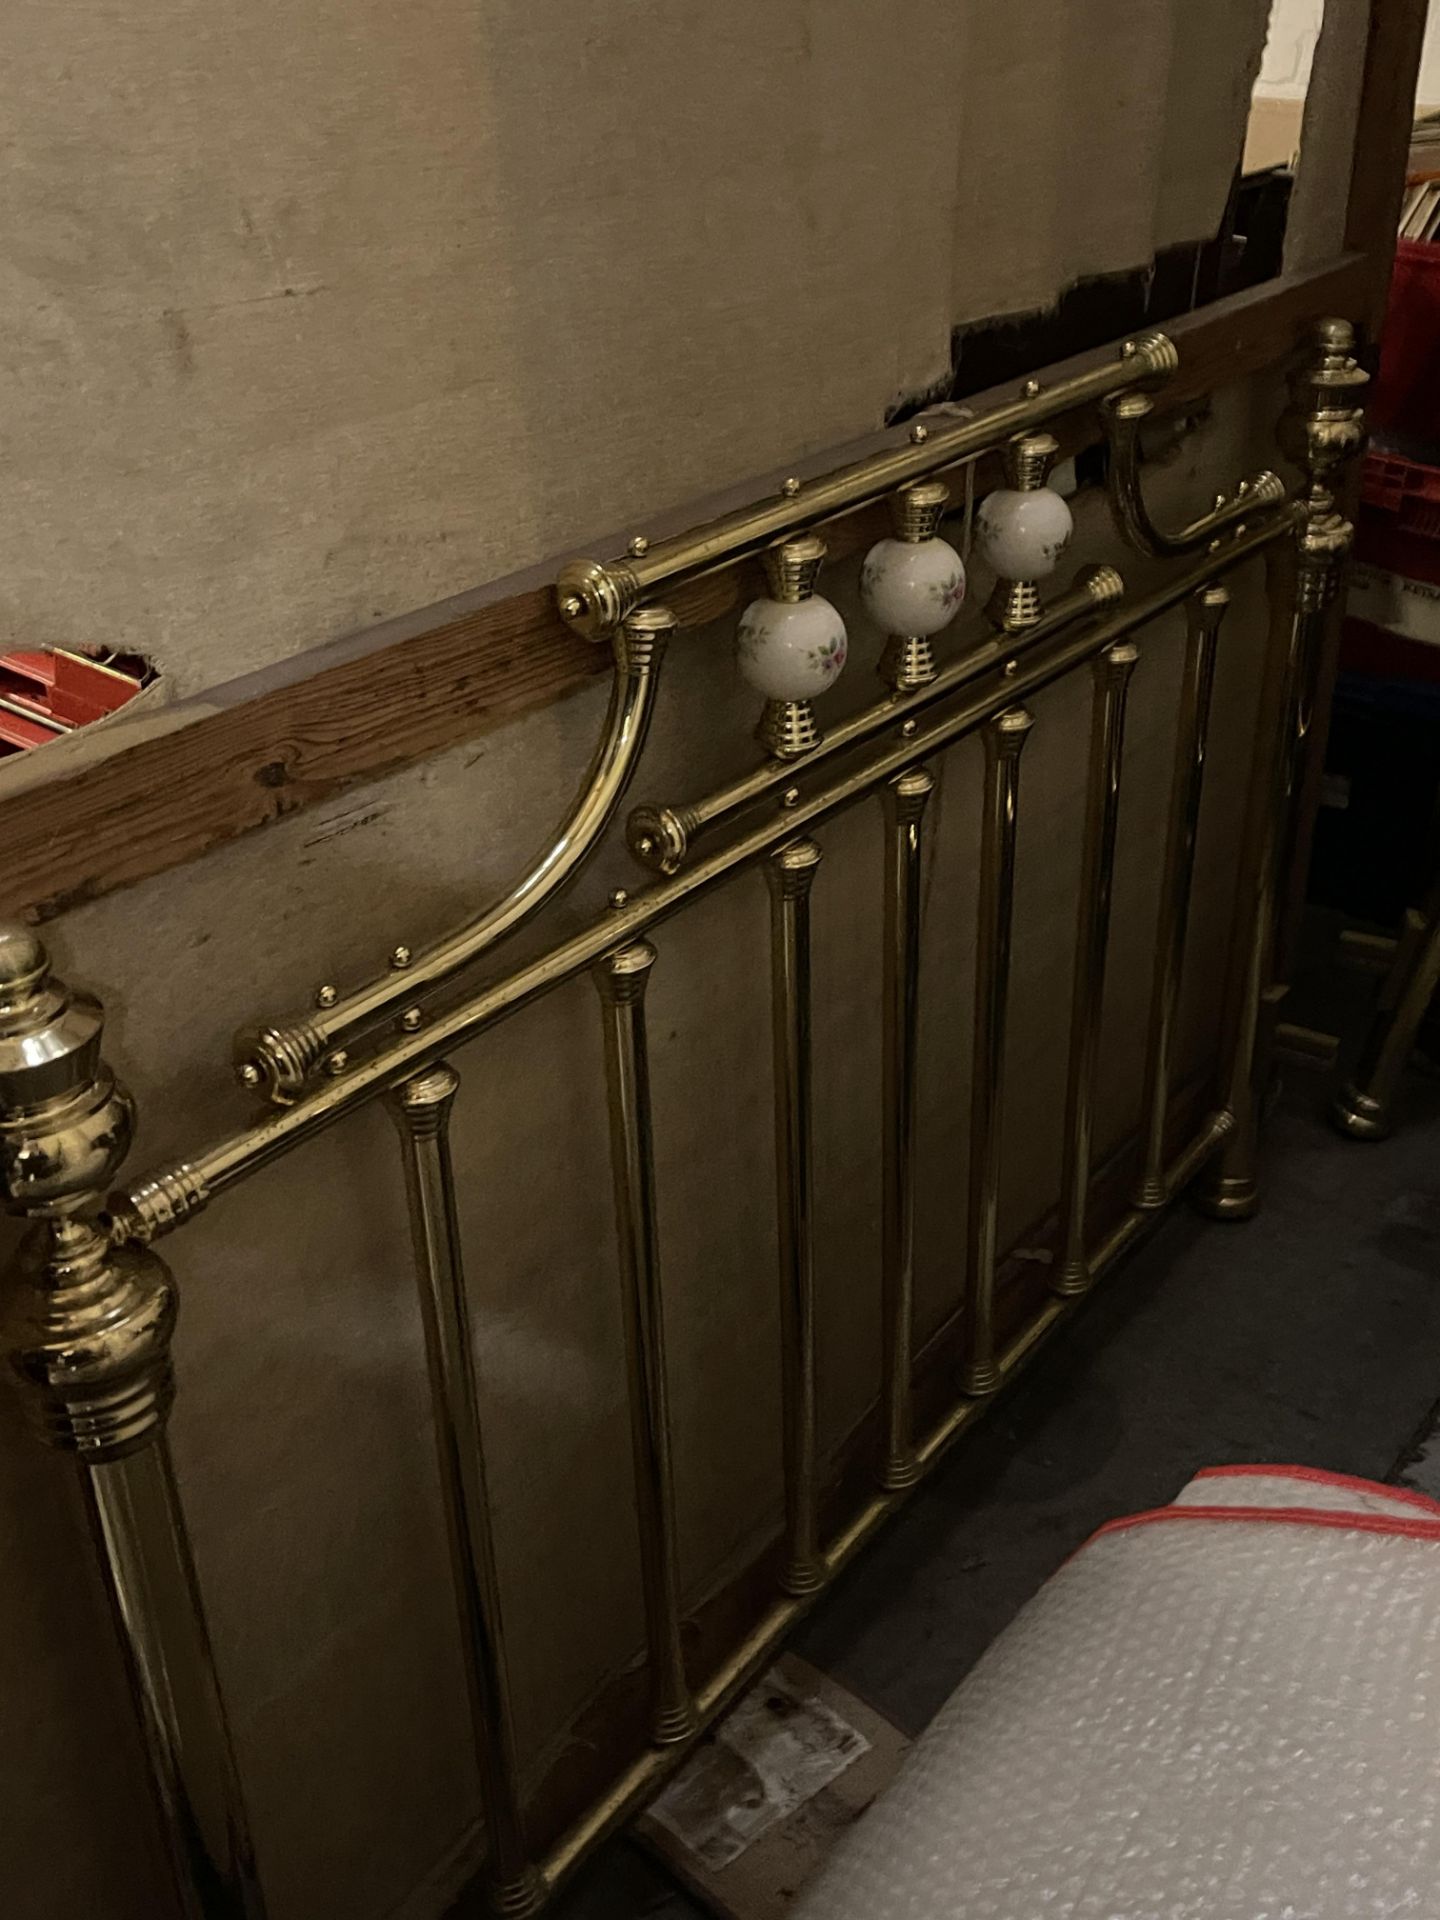 Brass double bed frame very old unclaimed property - Image 3 of 8